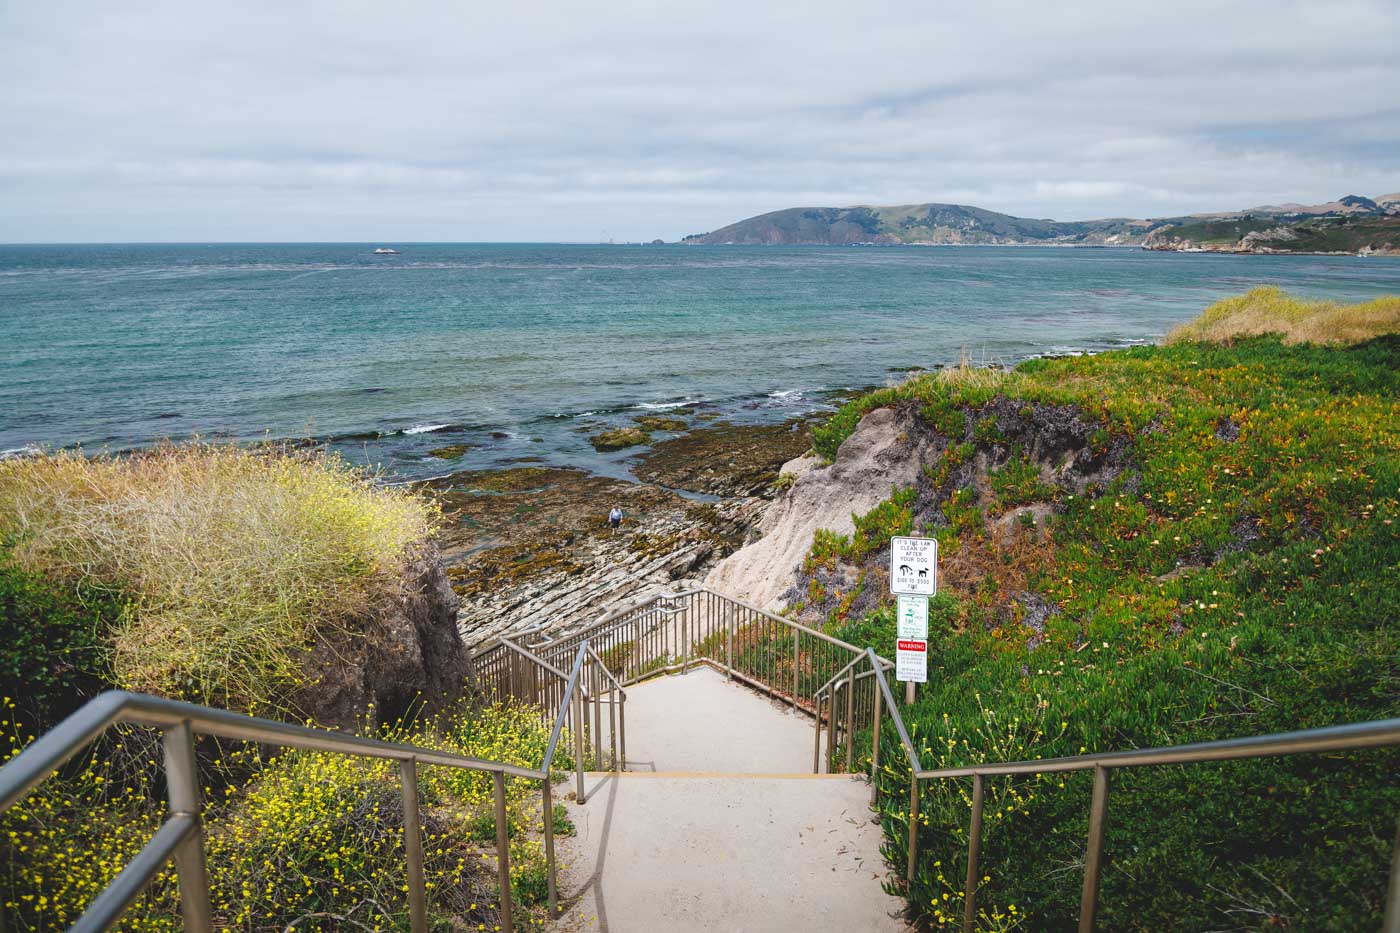 Stairs with metal railings leading down towards the tidepools of South Palisades Park.